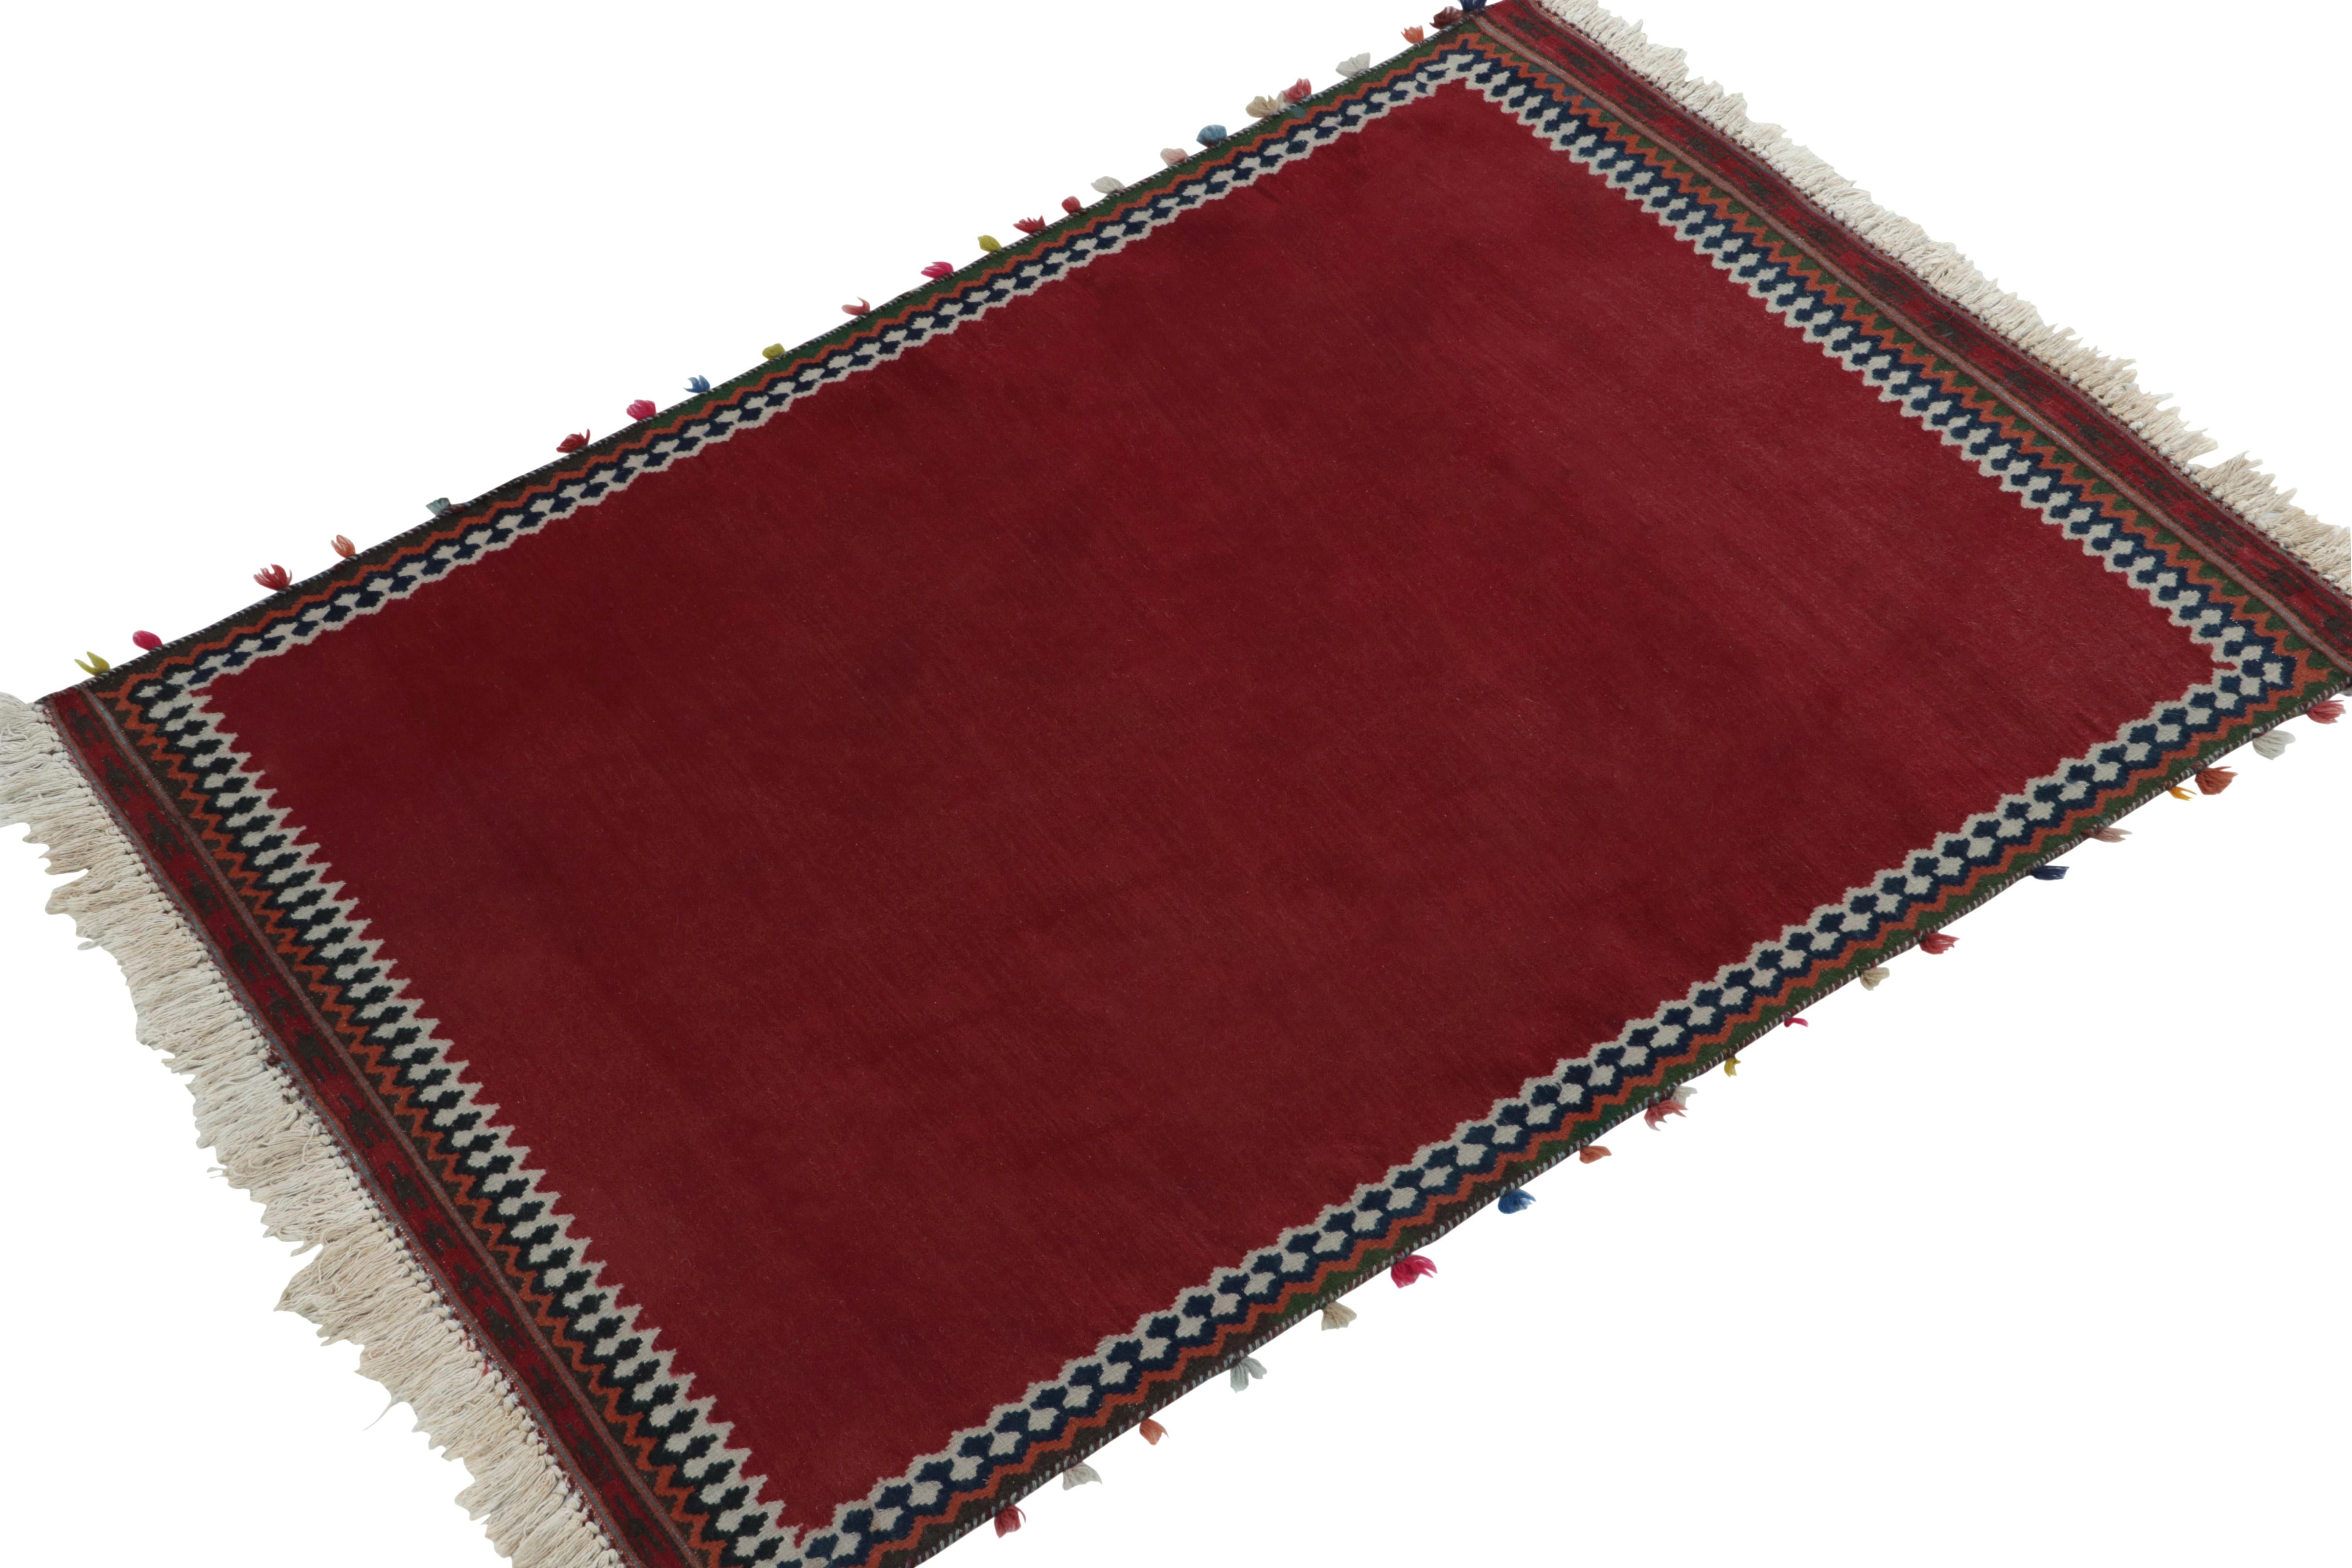 Celebrating unique mid-century aesthetics, a 3x5 vintage Kilim rug from our newly unveiled flatweave curations.

On the Design: Handwoven in wool circa 1950-1960, the Kilim rug features a rich red open field with deep blue & white borders